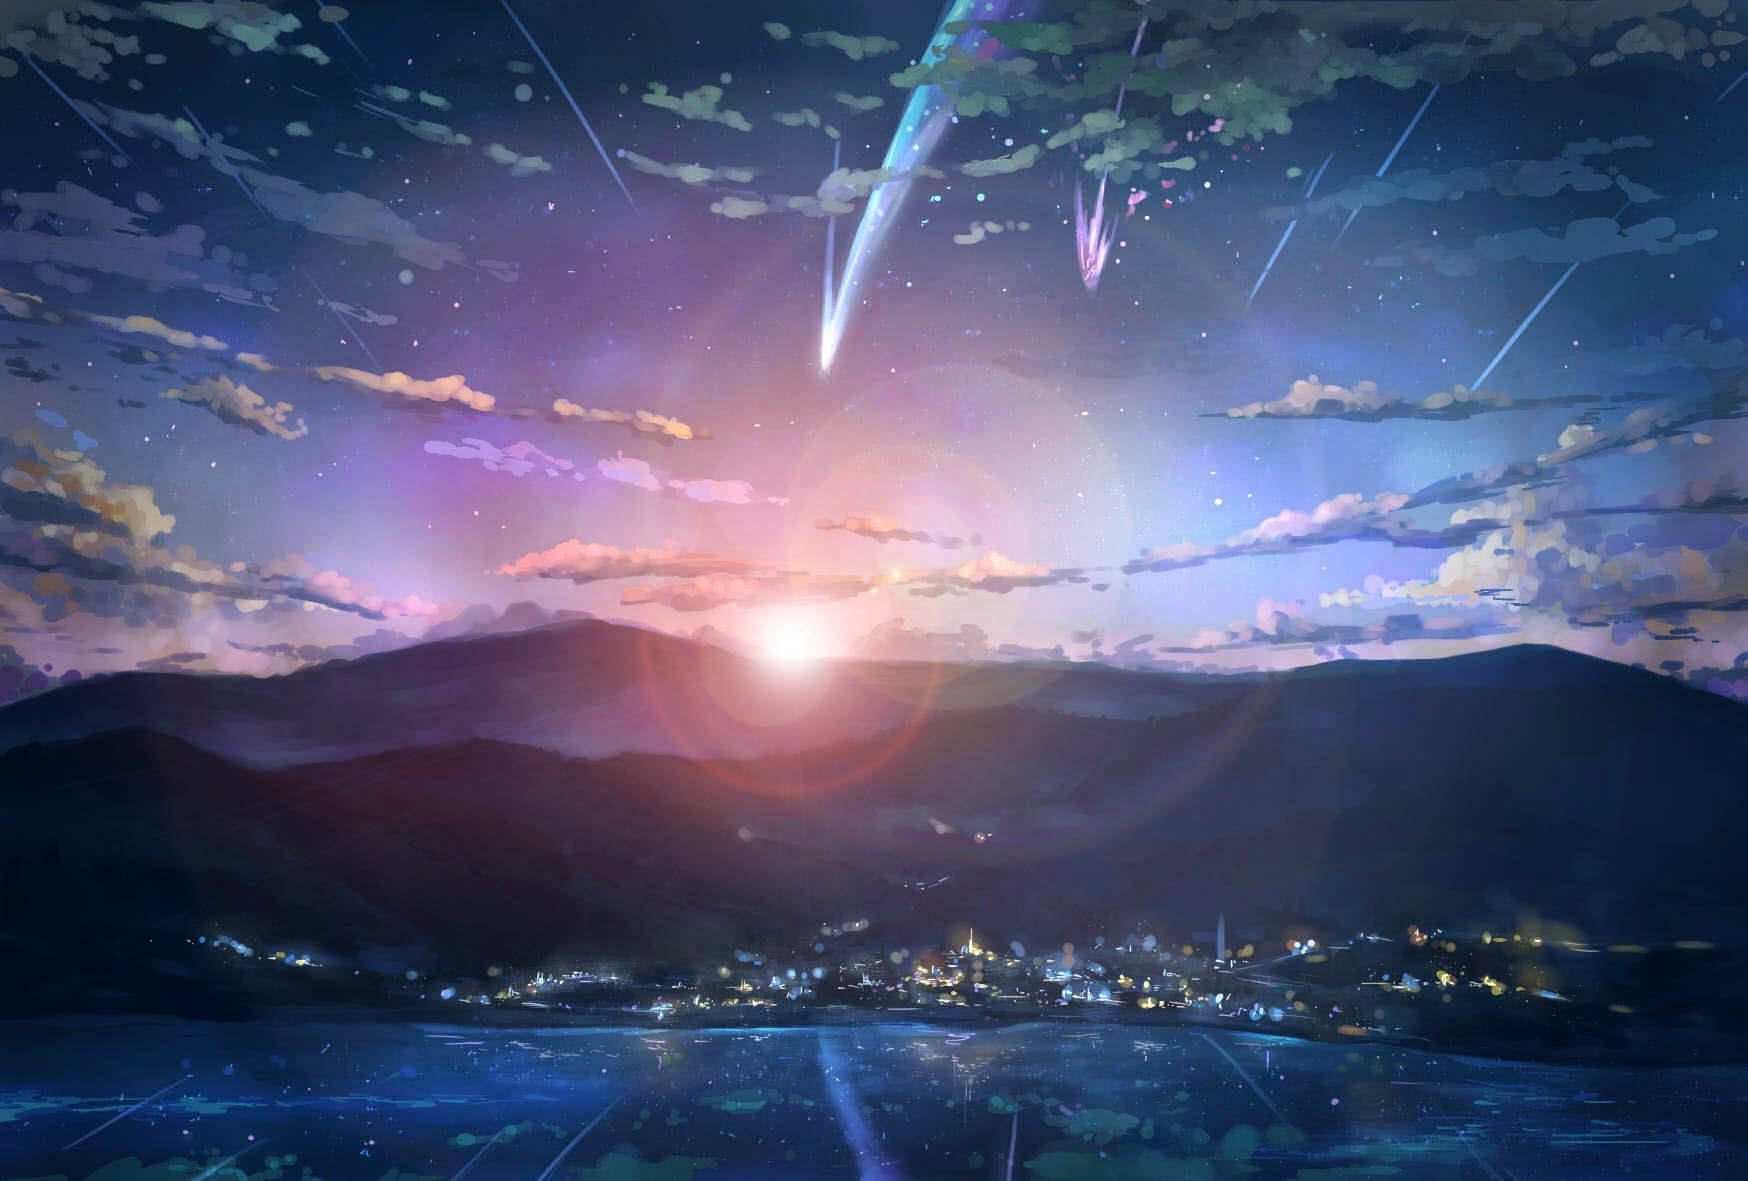 The small town of Itomori's Skyline, as seen in the movie Your Name. Wallpaper